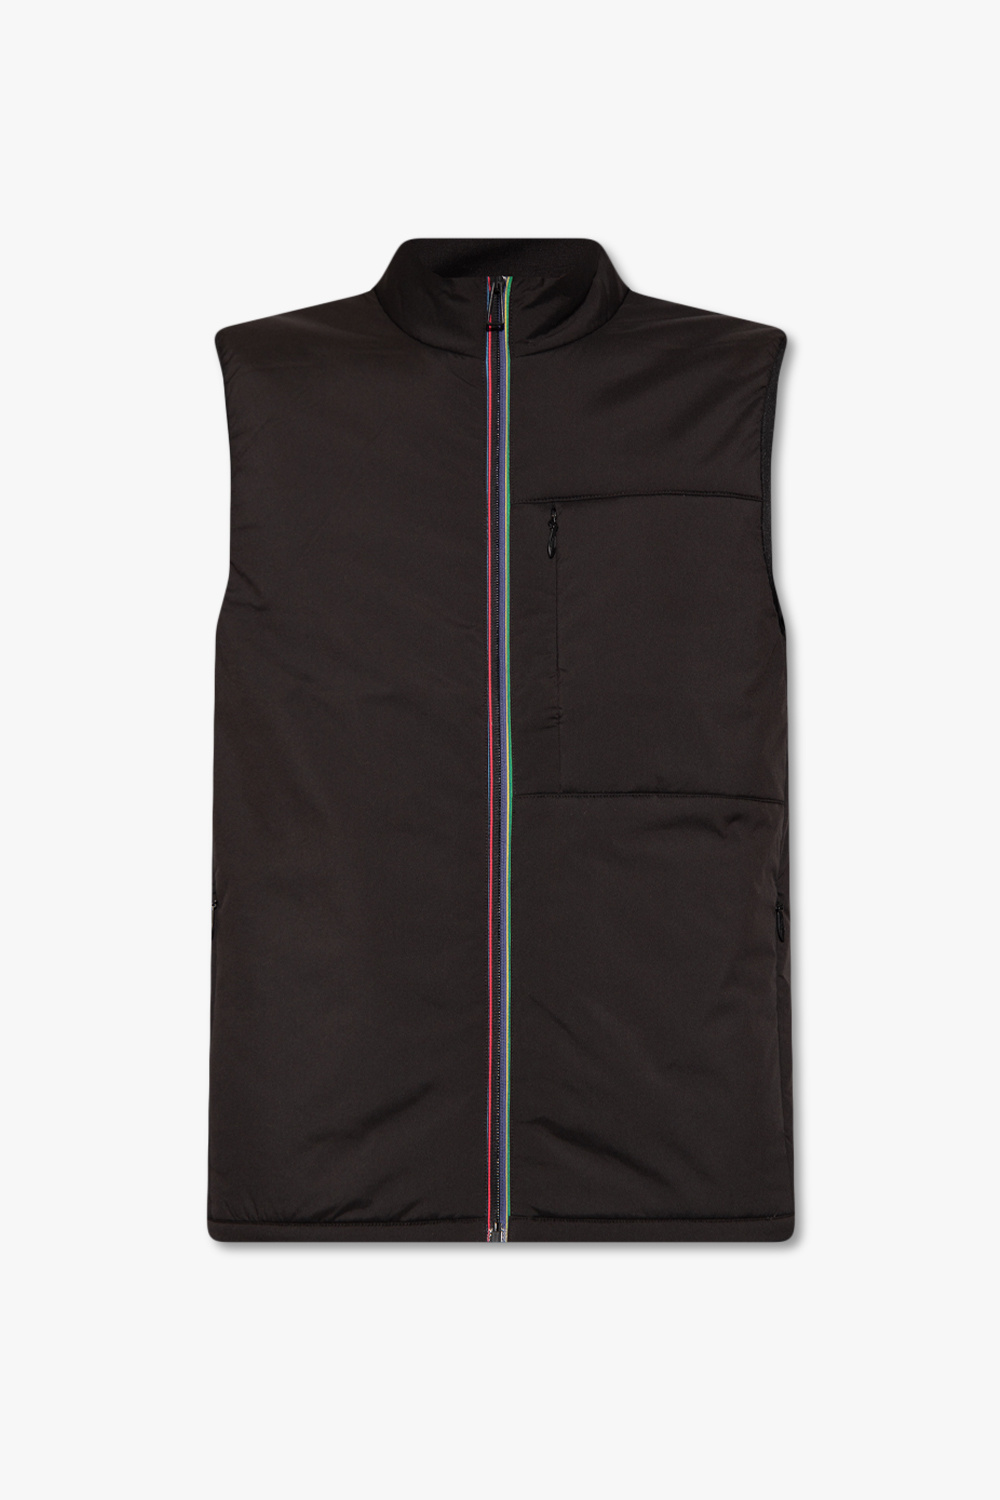 Enter the world Insulated vest